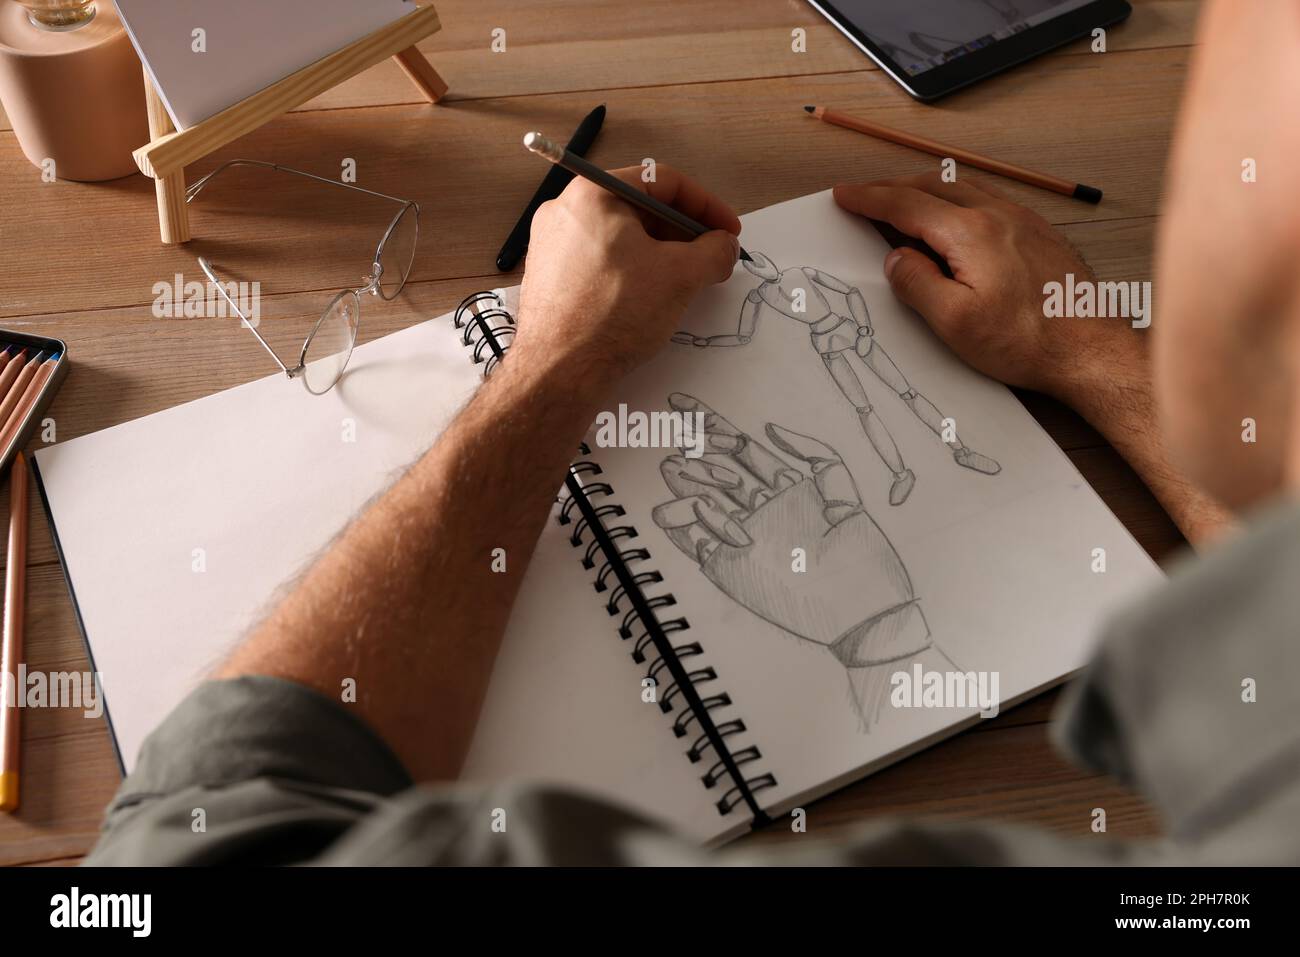 Man Drawing Mannequin Sketchbook Pencil Wooden Table Top View Stock Photo  by ©NewAfrica 556869706